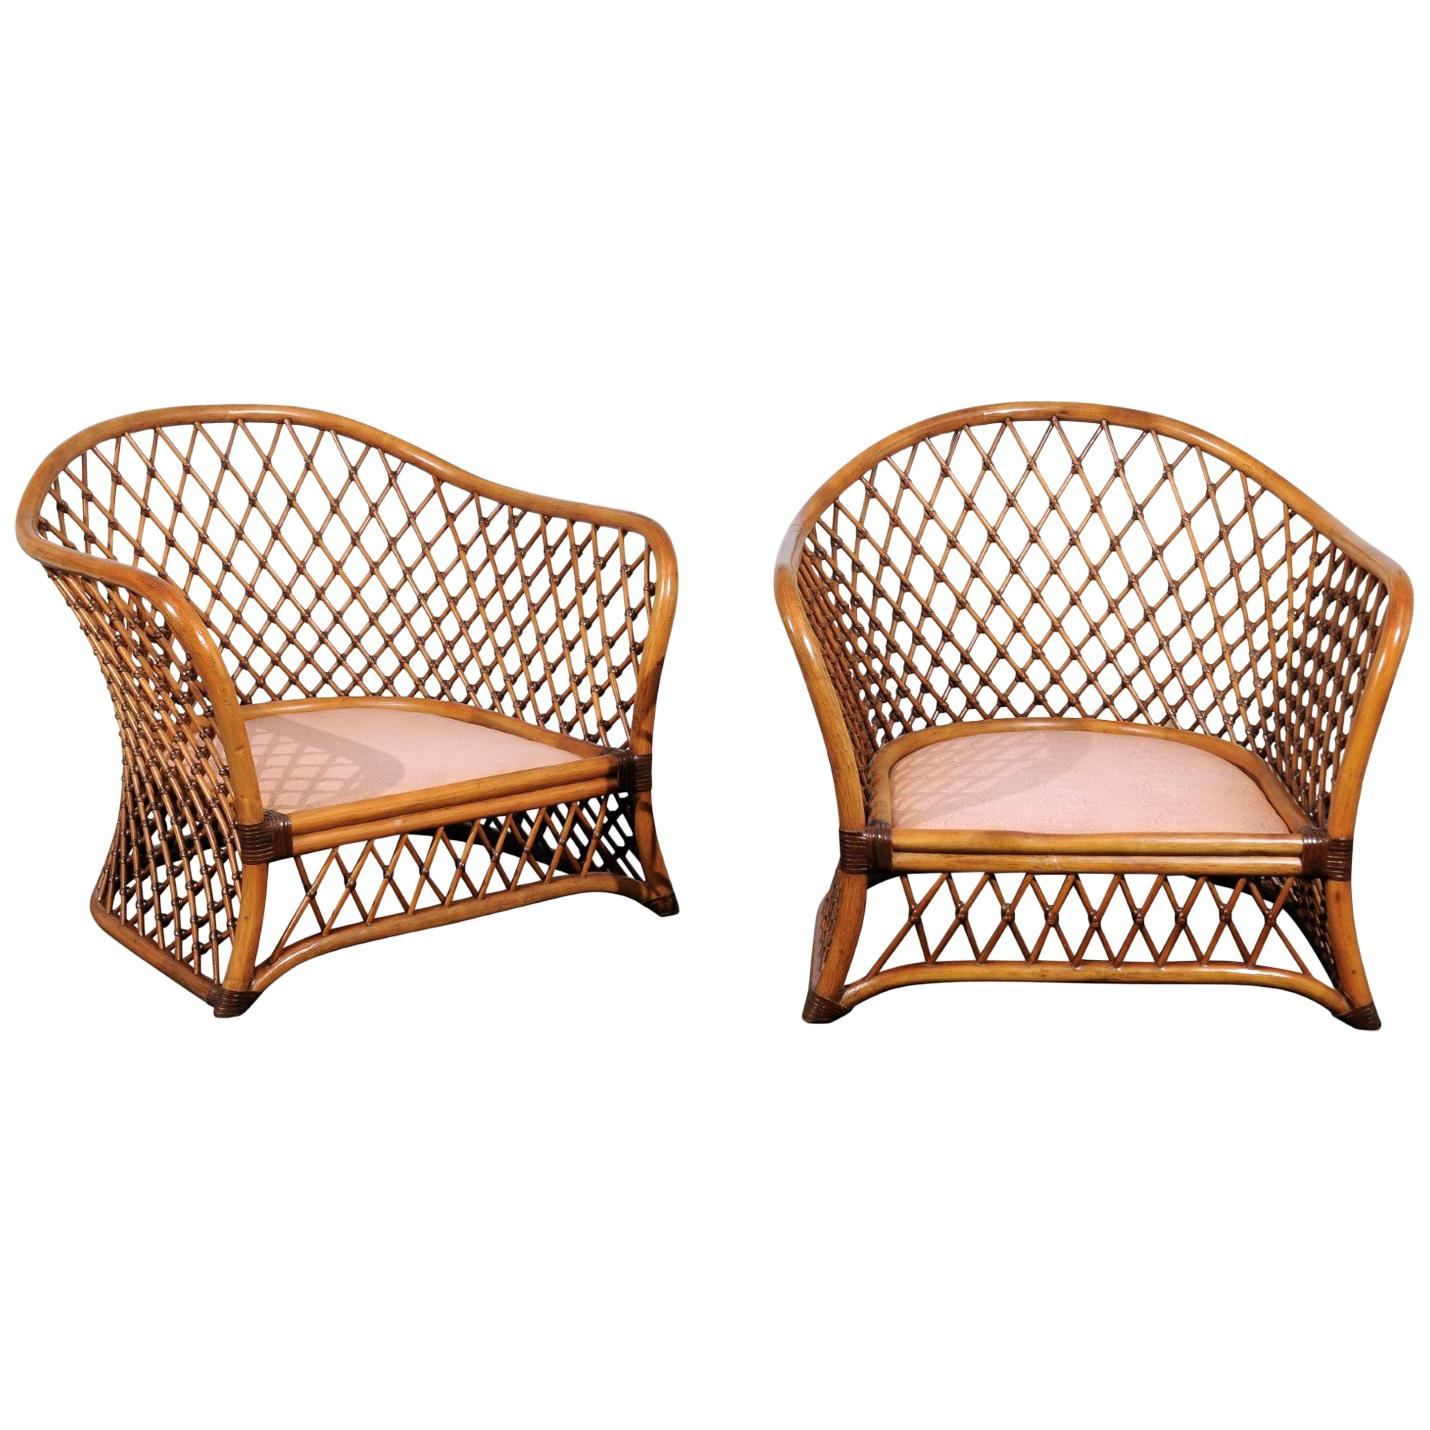 Sculptural Restored Pair of Large-Scale Lattice Club Chairs, circa 1990